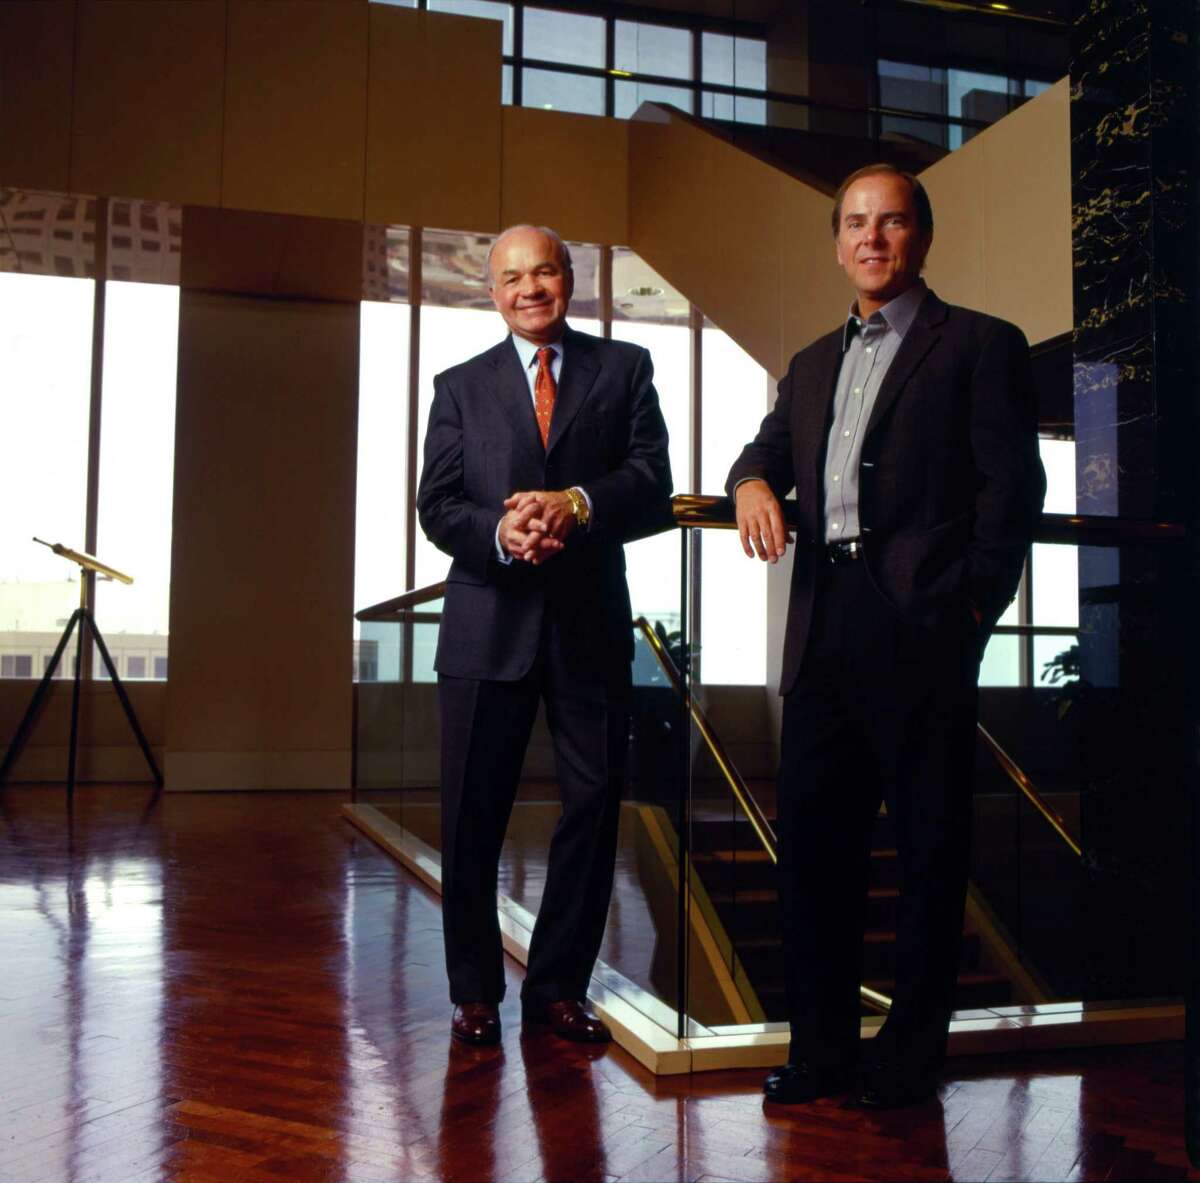 Former Enron Chairman Kenneth Lay (l.) and former Enron CEO Jeff Skilling at Enron Headquarters, from Alex Gibney's "Enron: The Smartest Guys in the Room, a Magnolia Pictures release. PHOTO CREDIT: Wyatt McSpadden